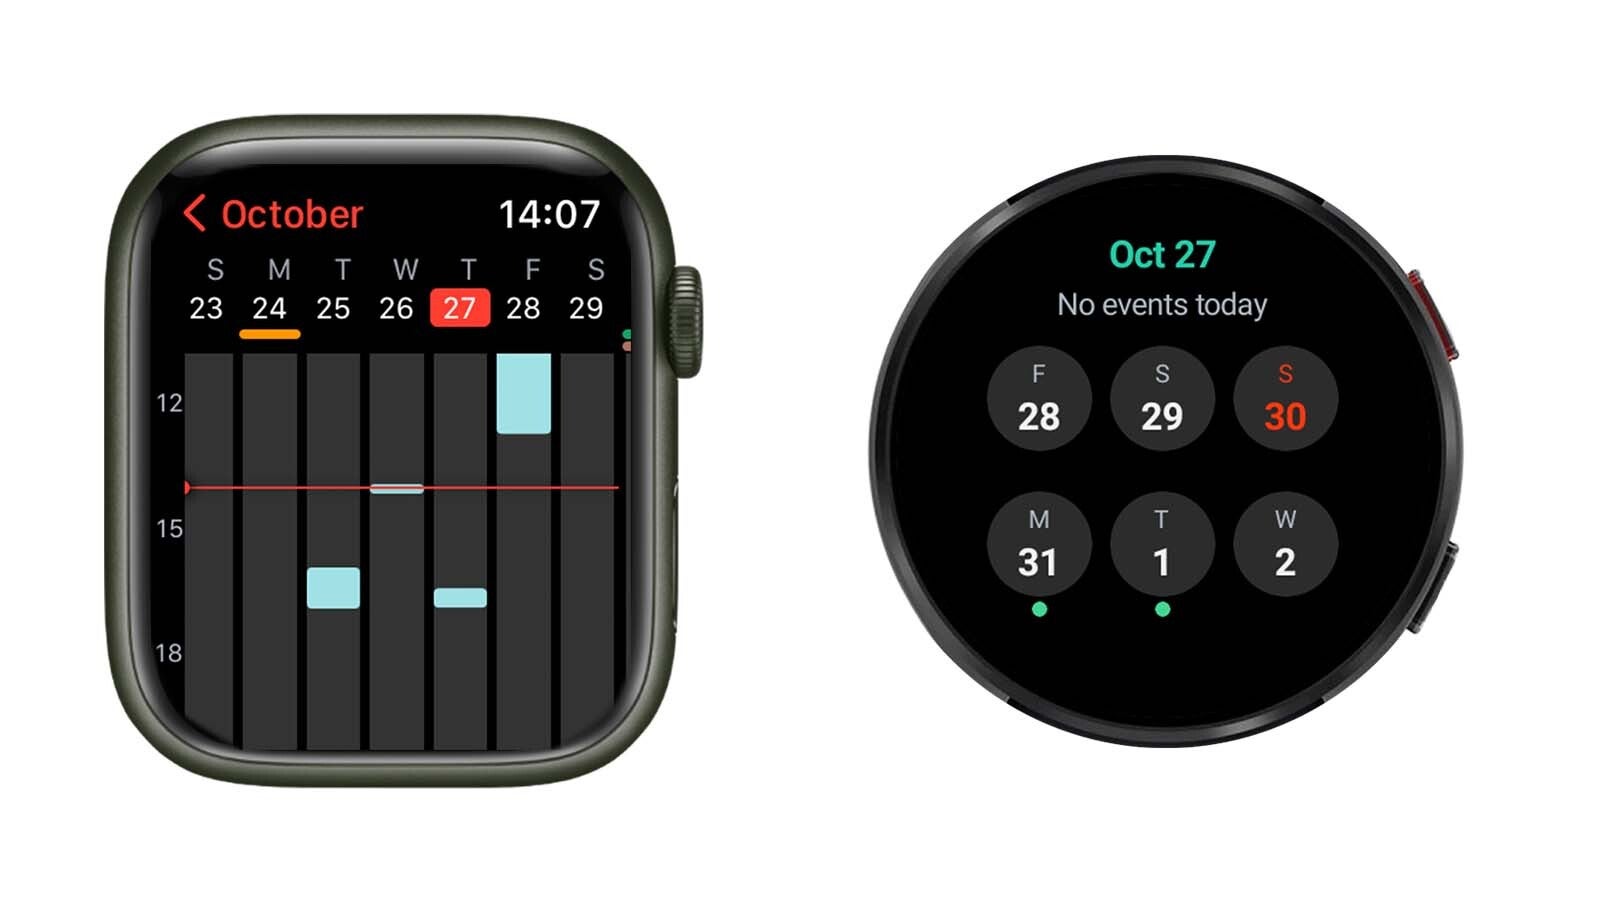 Apple Watch vs Samsung Galaxy Watch interface comparison - Are round smartwatches terribly impractical? Why the rectangular Apple Watch makes way more sense